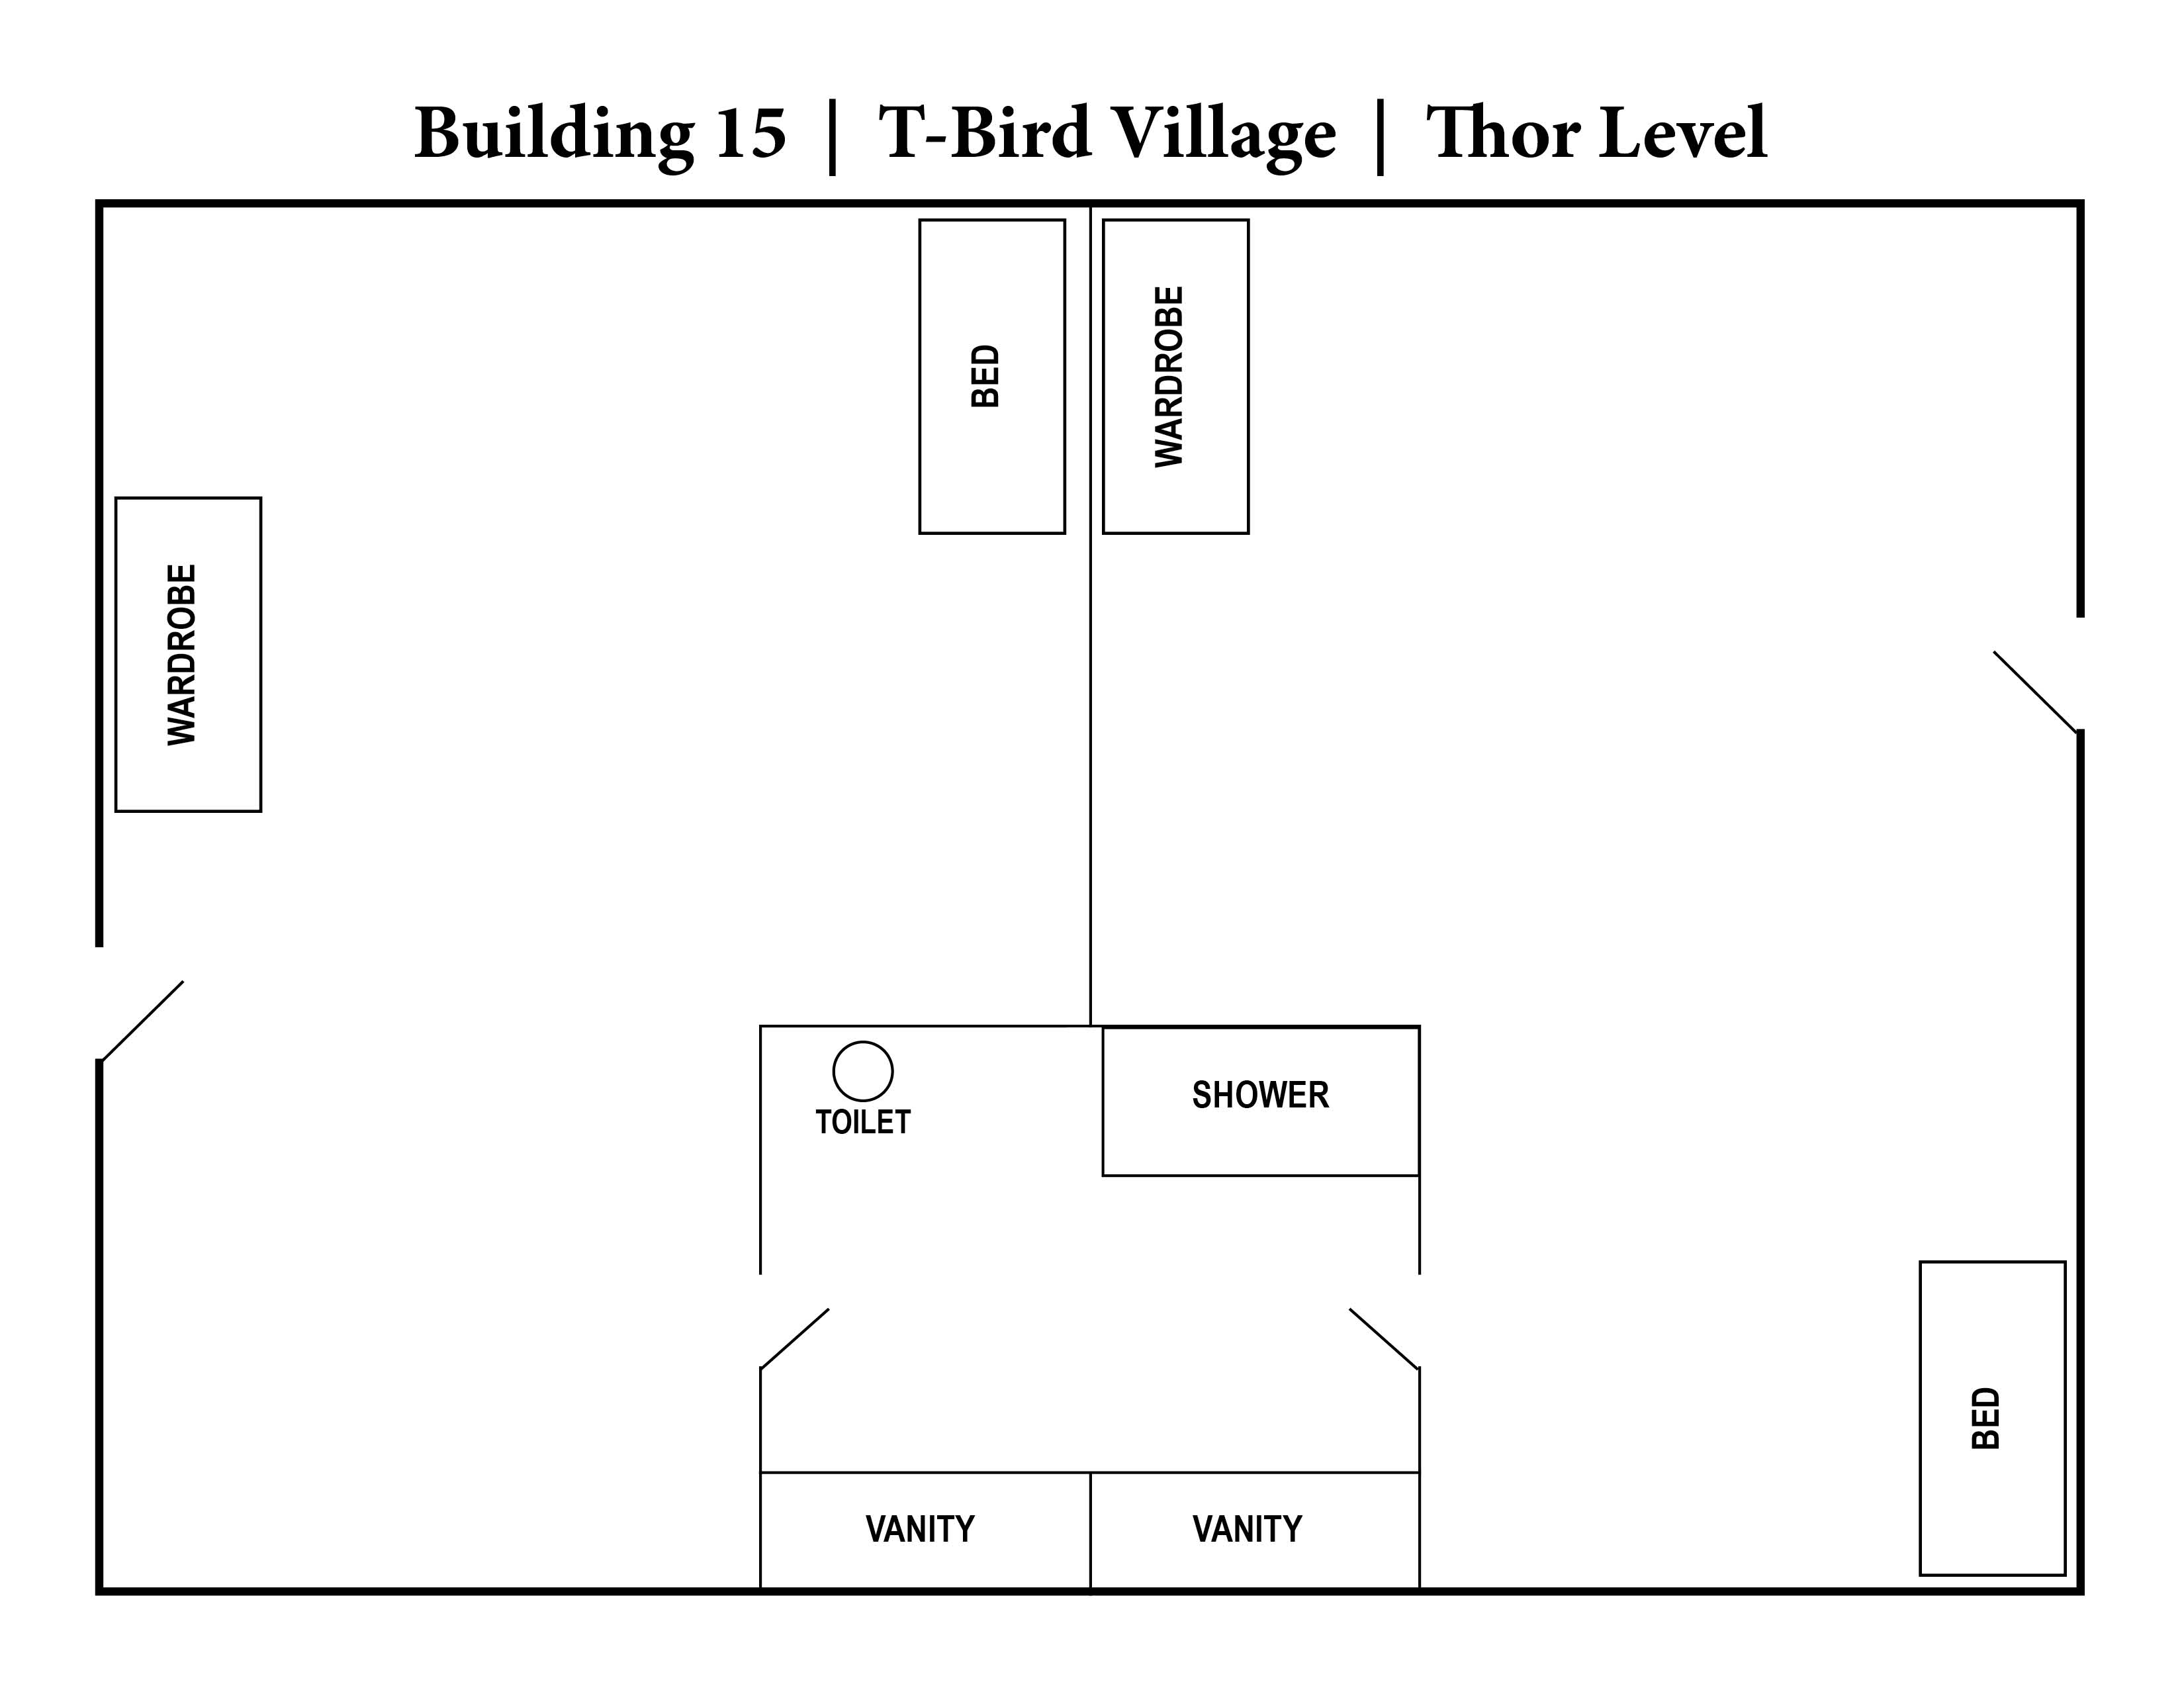 A photo of the layout of Building 15 - Thor level.